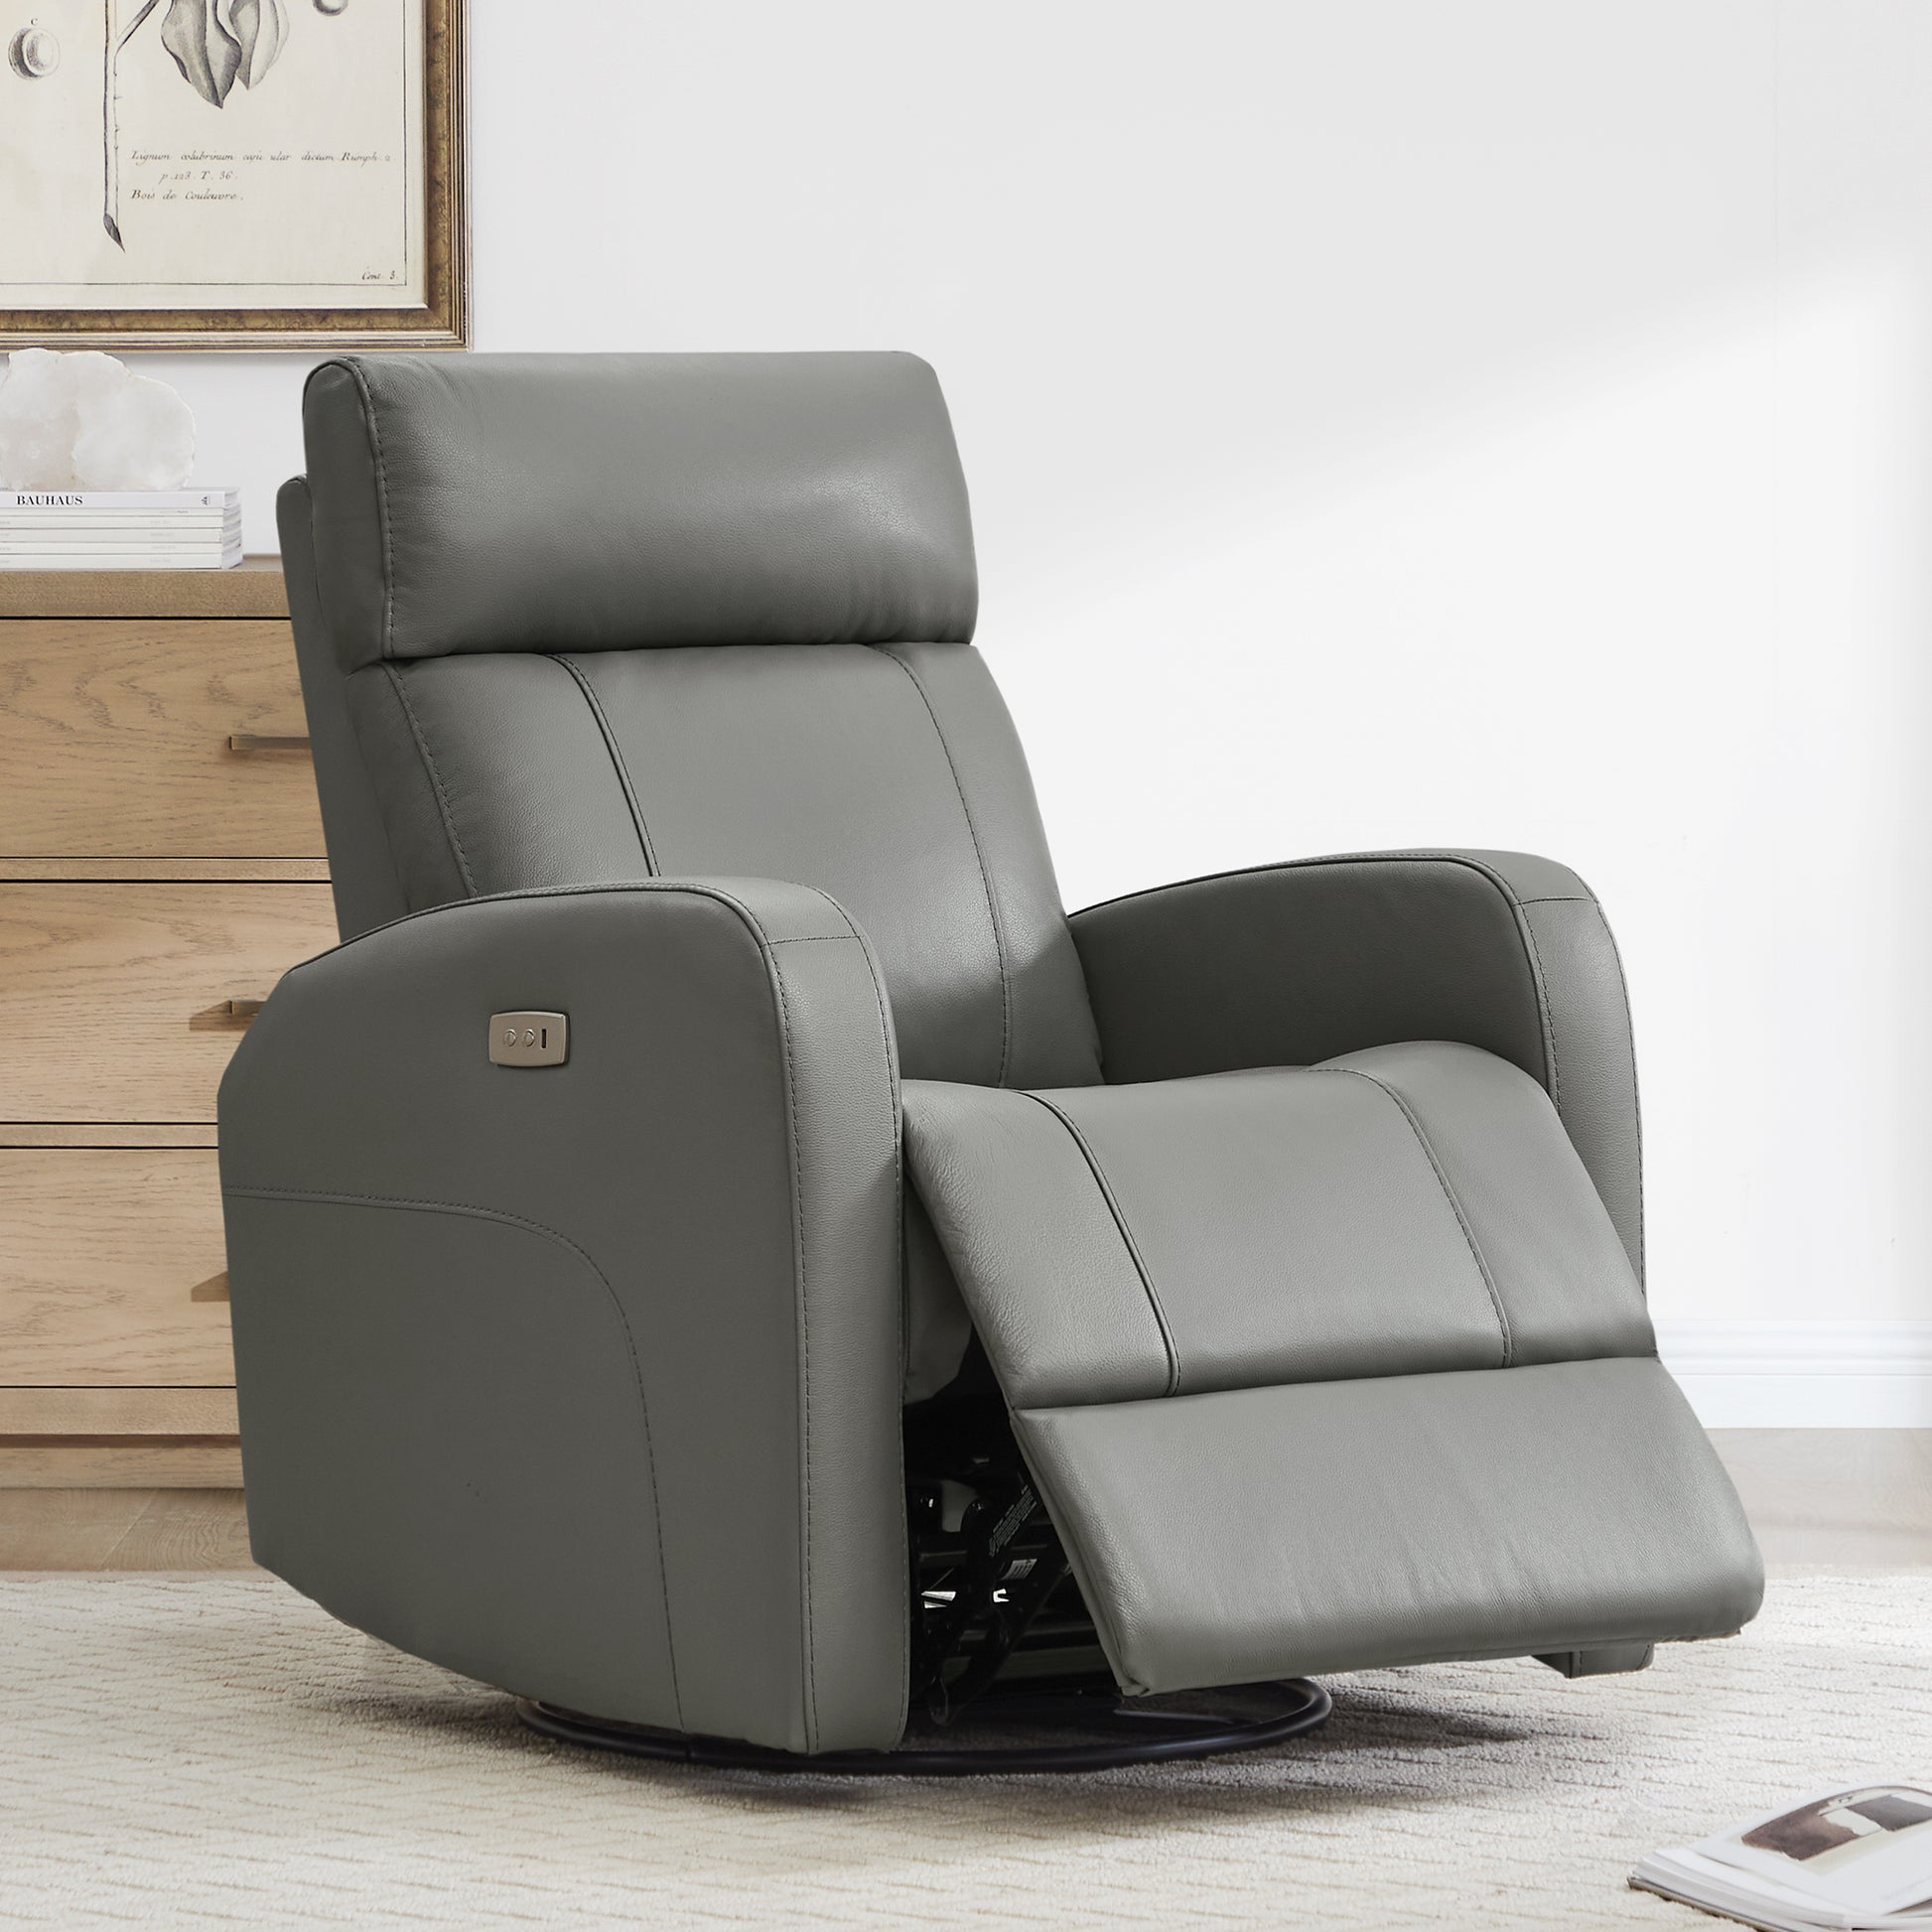 CHITA LIVING-Joy Power Swivel Recliner with Manual Headrest-Recliners-Genuine Leather-Light Gray-